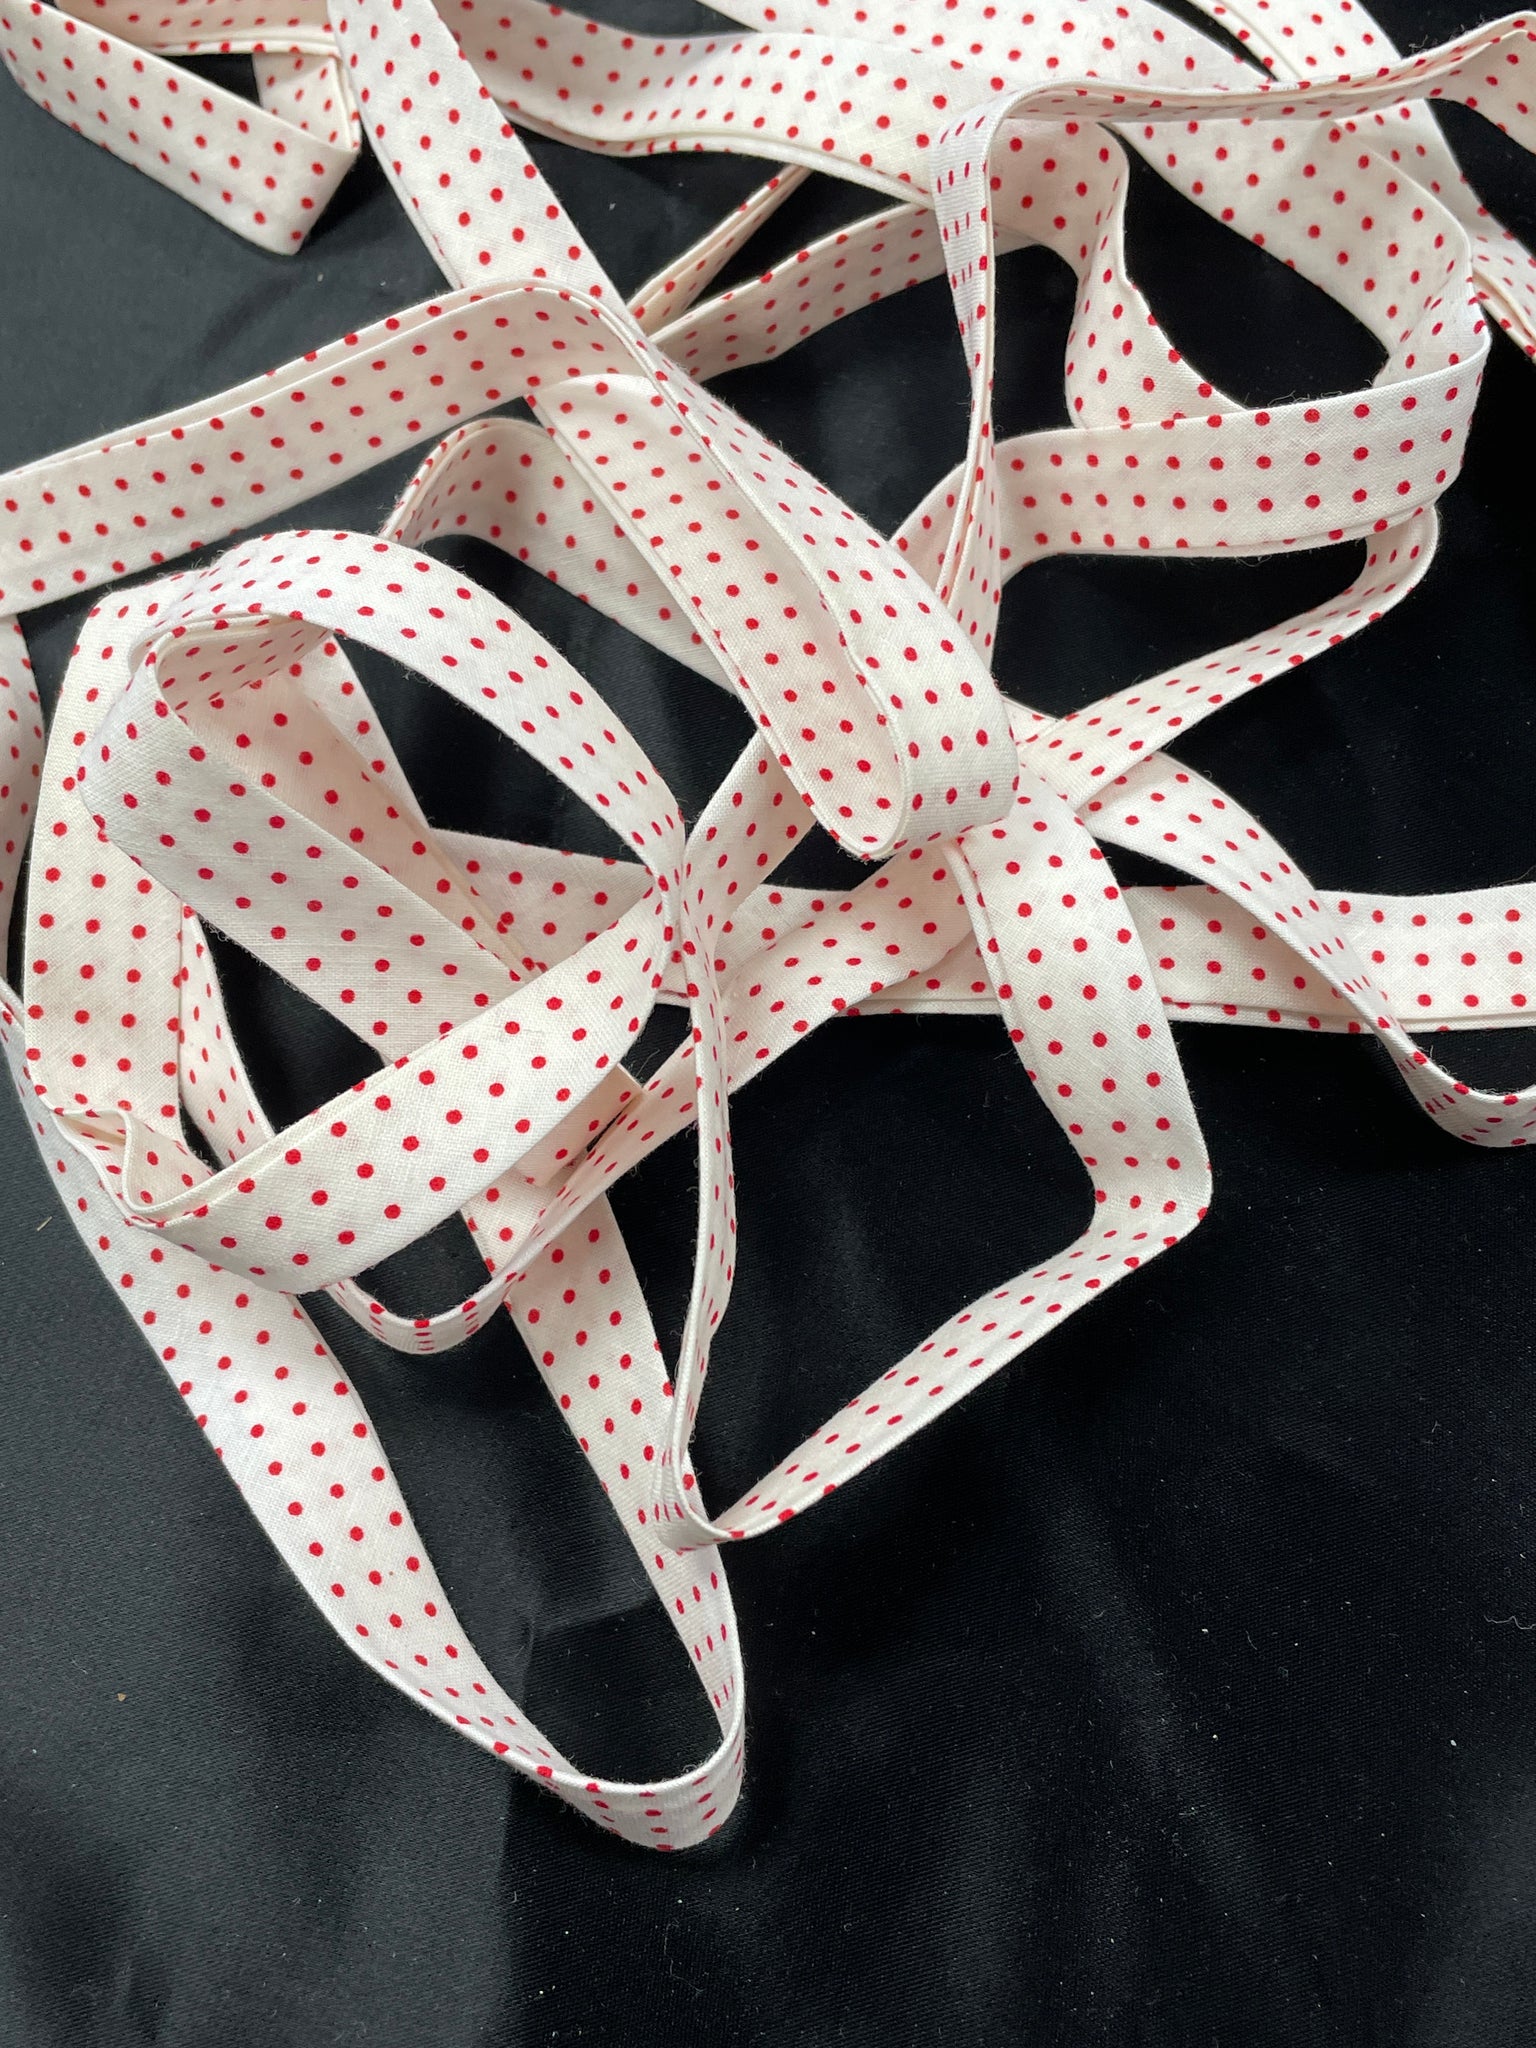 4 1/4 YD Cotton Printed Tape - White with Red Polka Dots